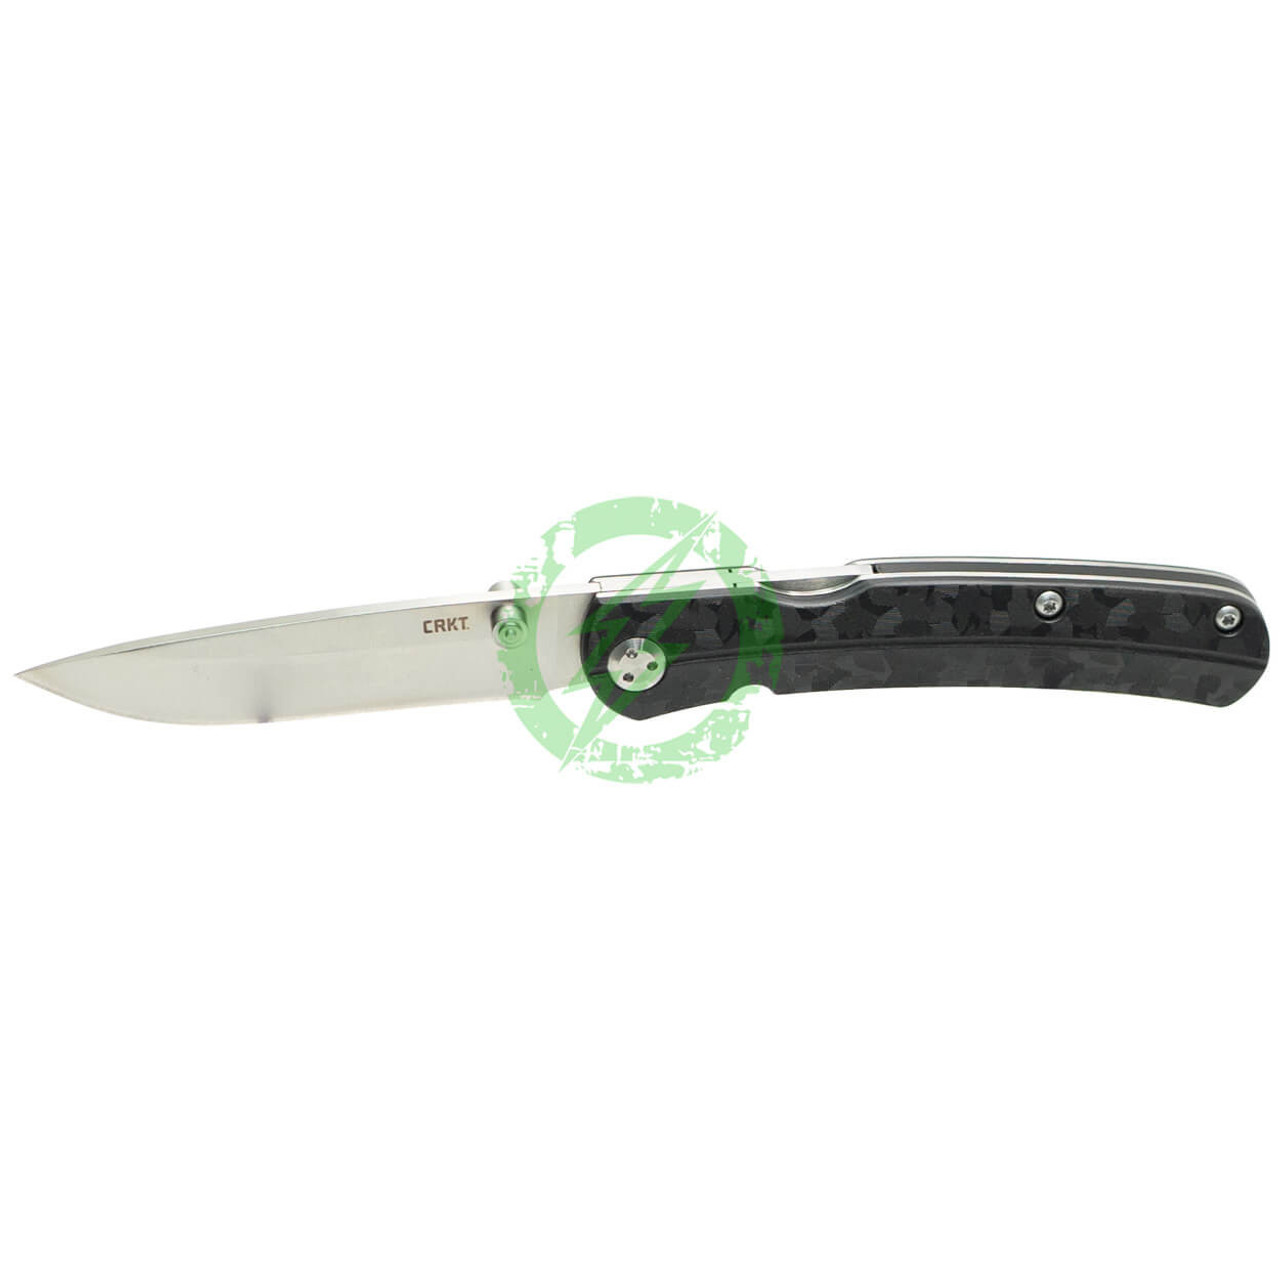 CRKT (Columbia River Knife Tool) CRKT Kith Black Folding Blade Knife with Satin Blade & Glass Reinforced Handle 